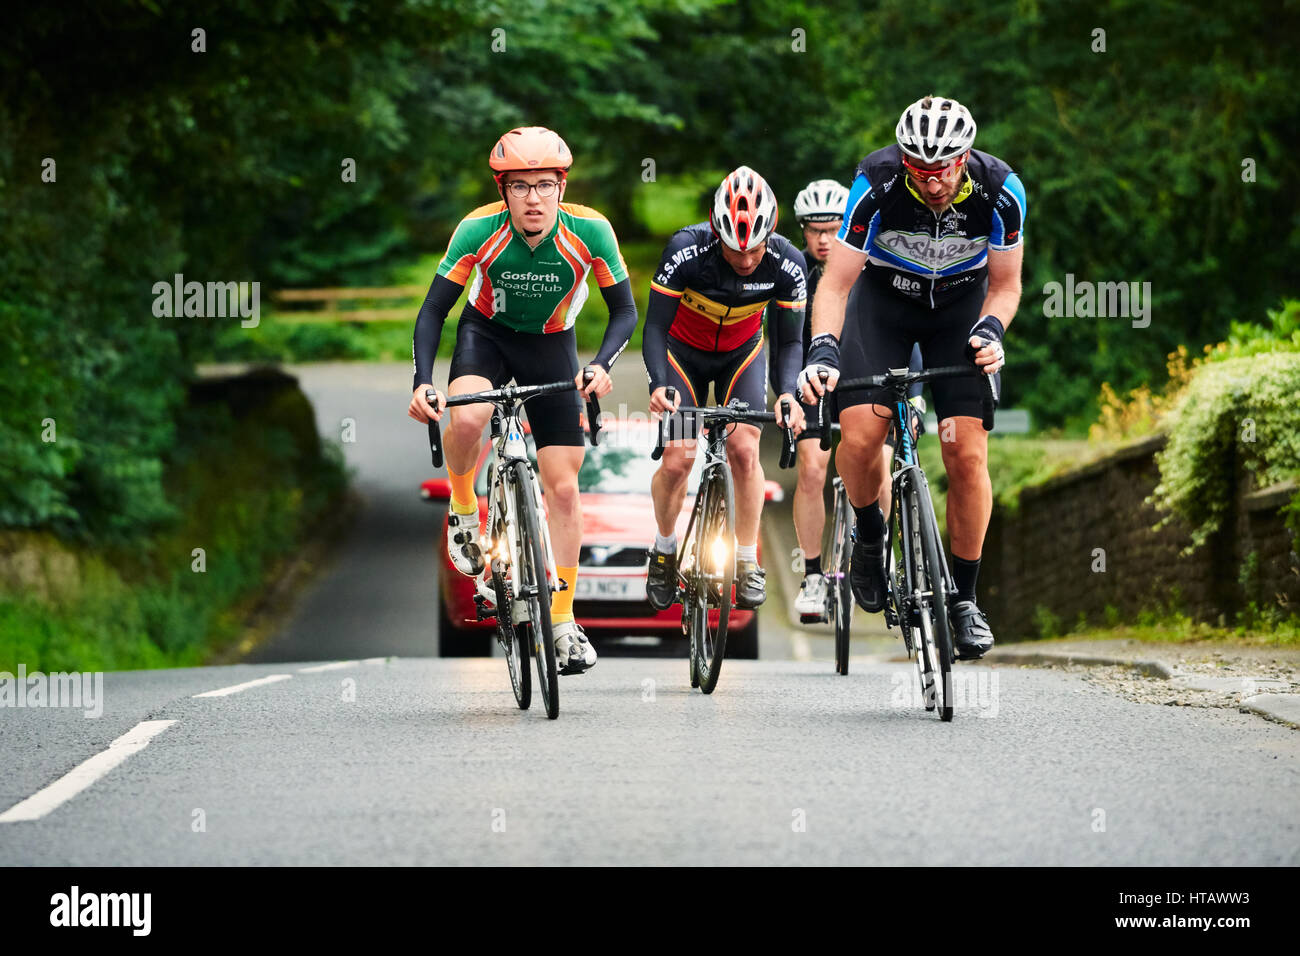 NORTHUMBERLAND, ENGLAND, UK - AUGUST 07, 2016: A group of riders out on a training ride for a long distance endurance road race. Stock Photo